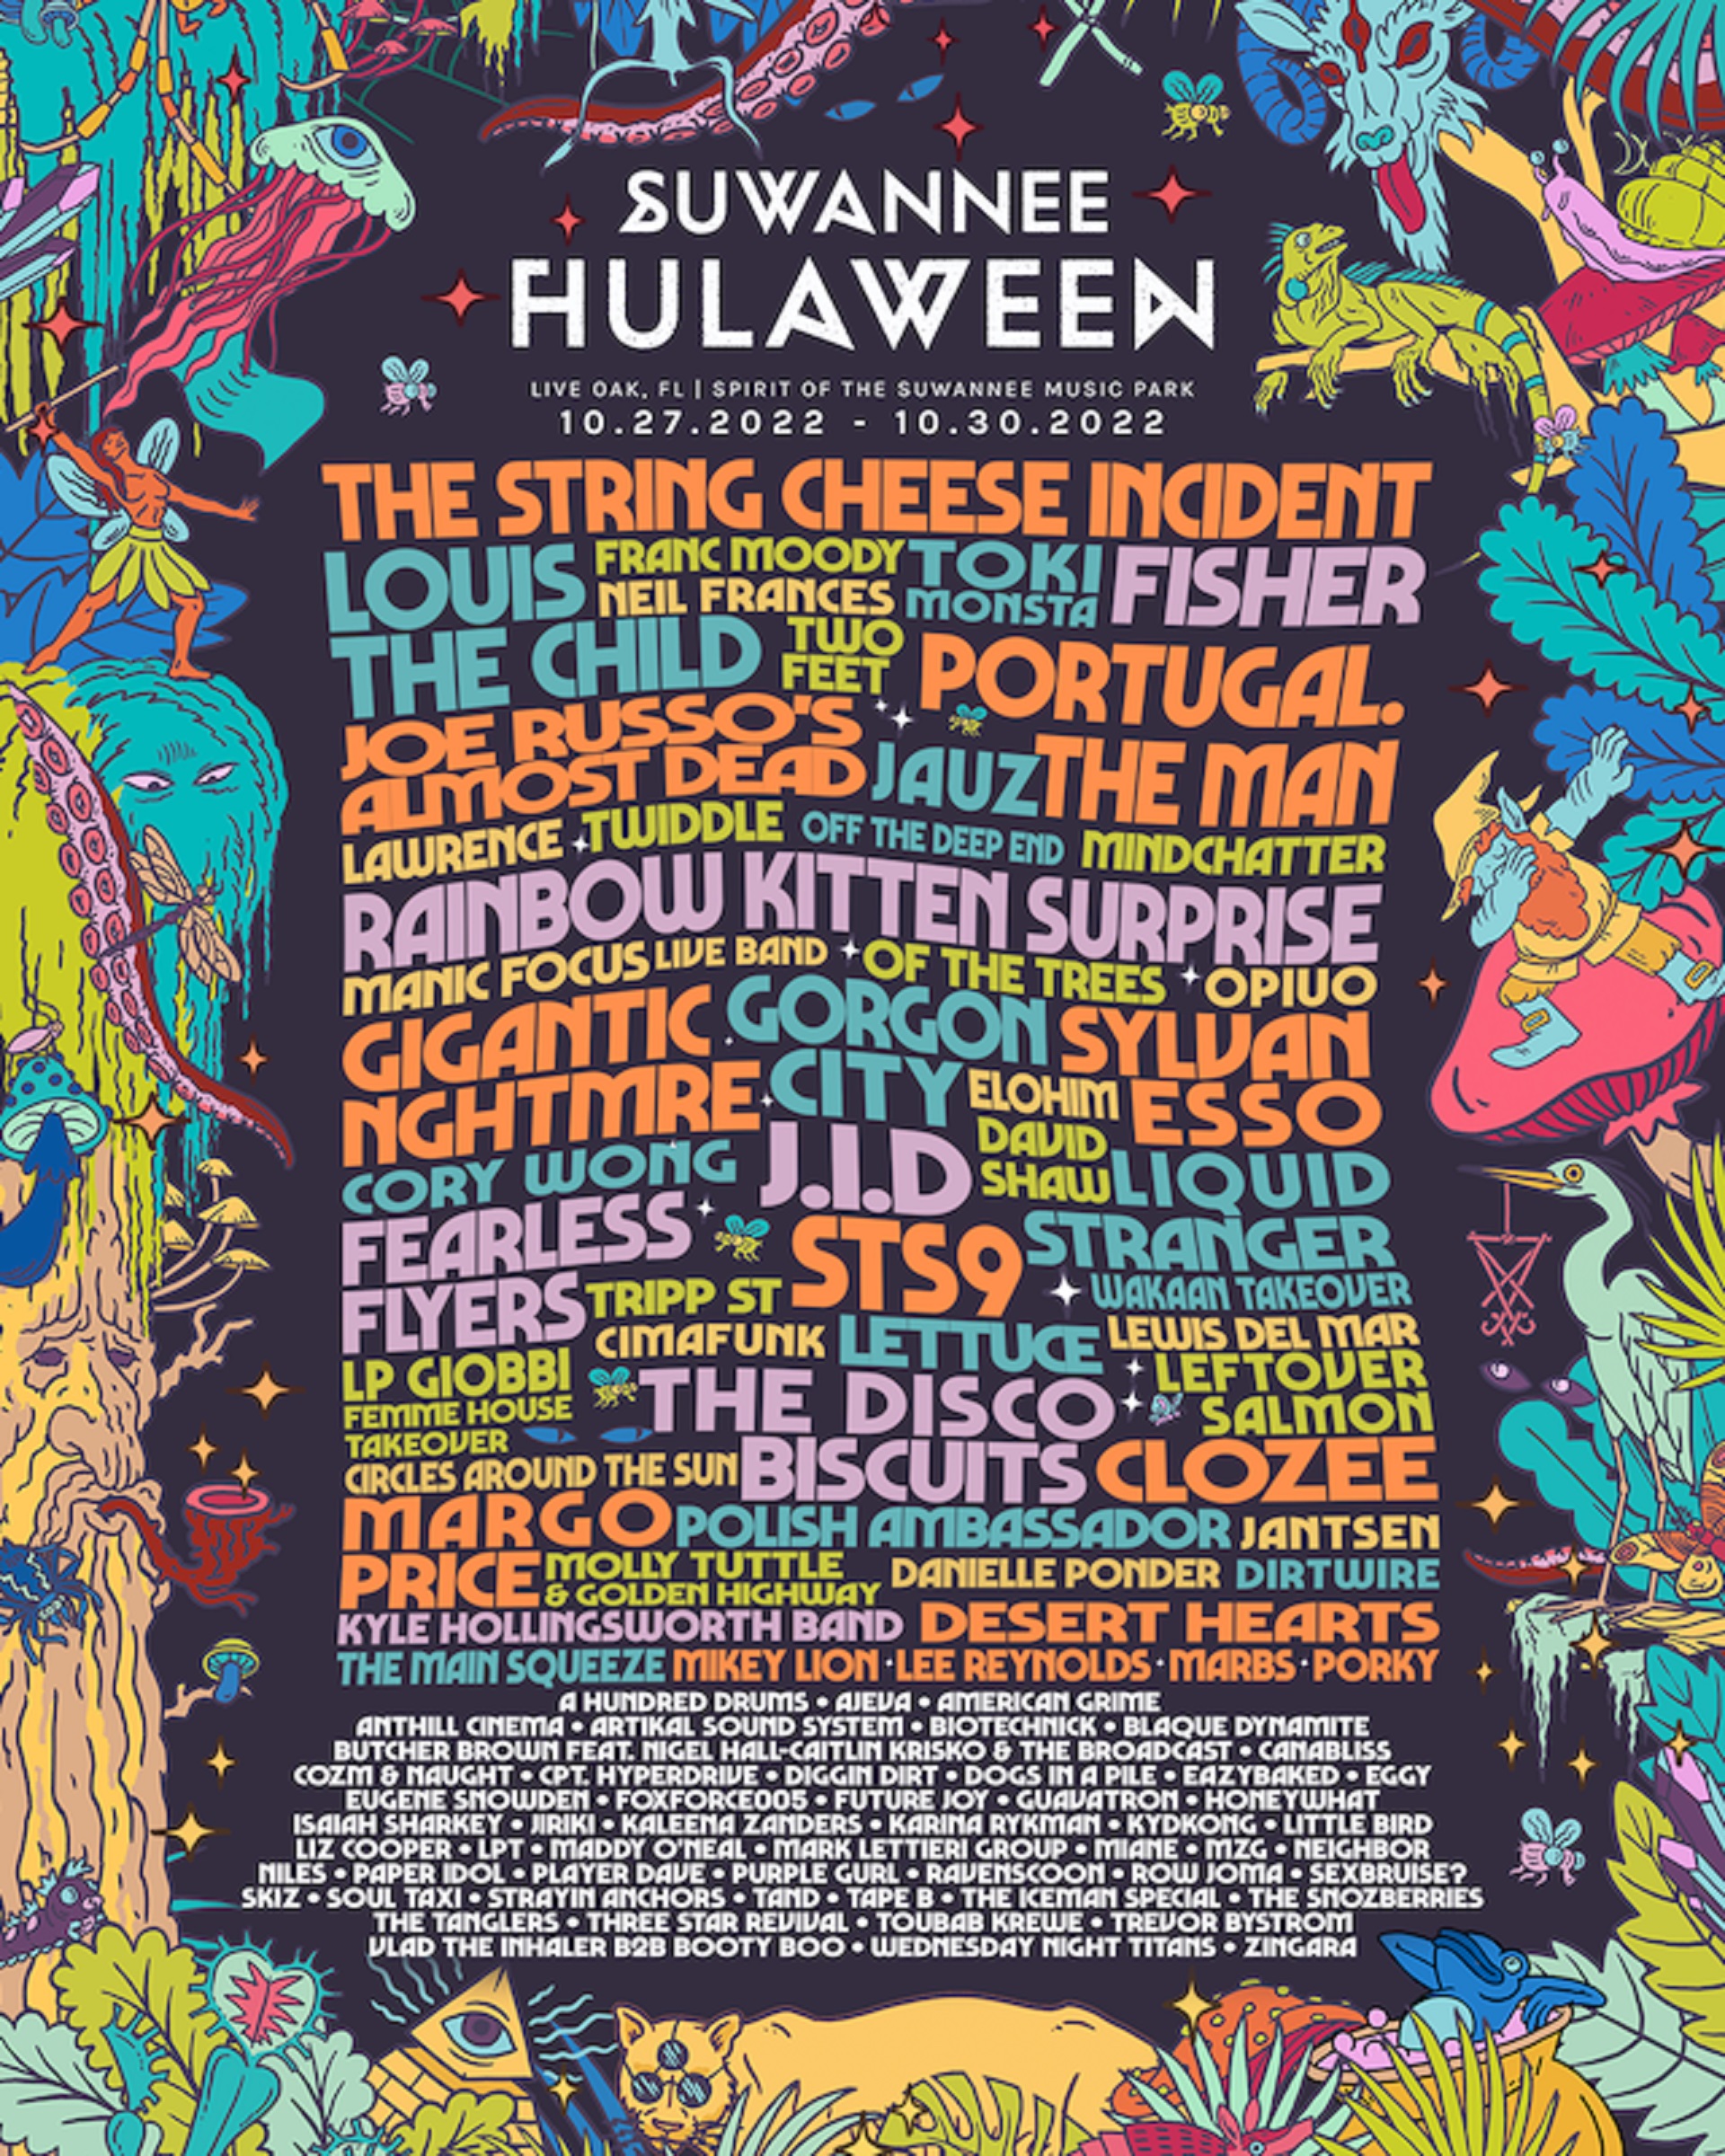 Suwannee Hulaween adds TOKiMONSTA, Joe Russo’s Almost Dead, and The